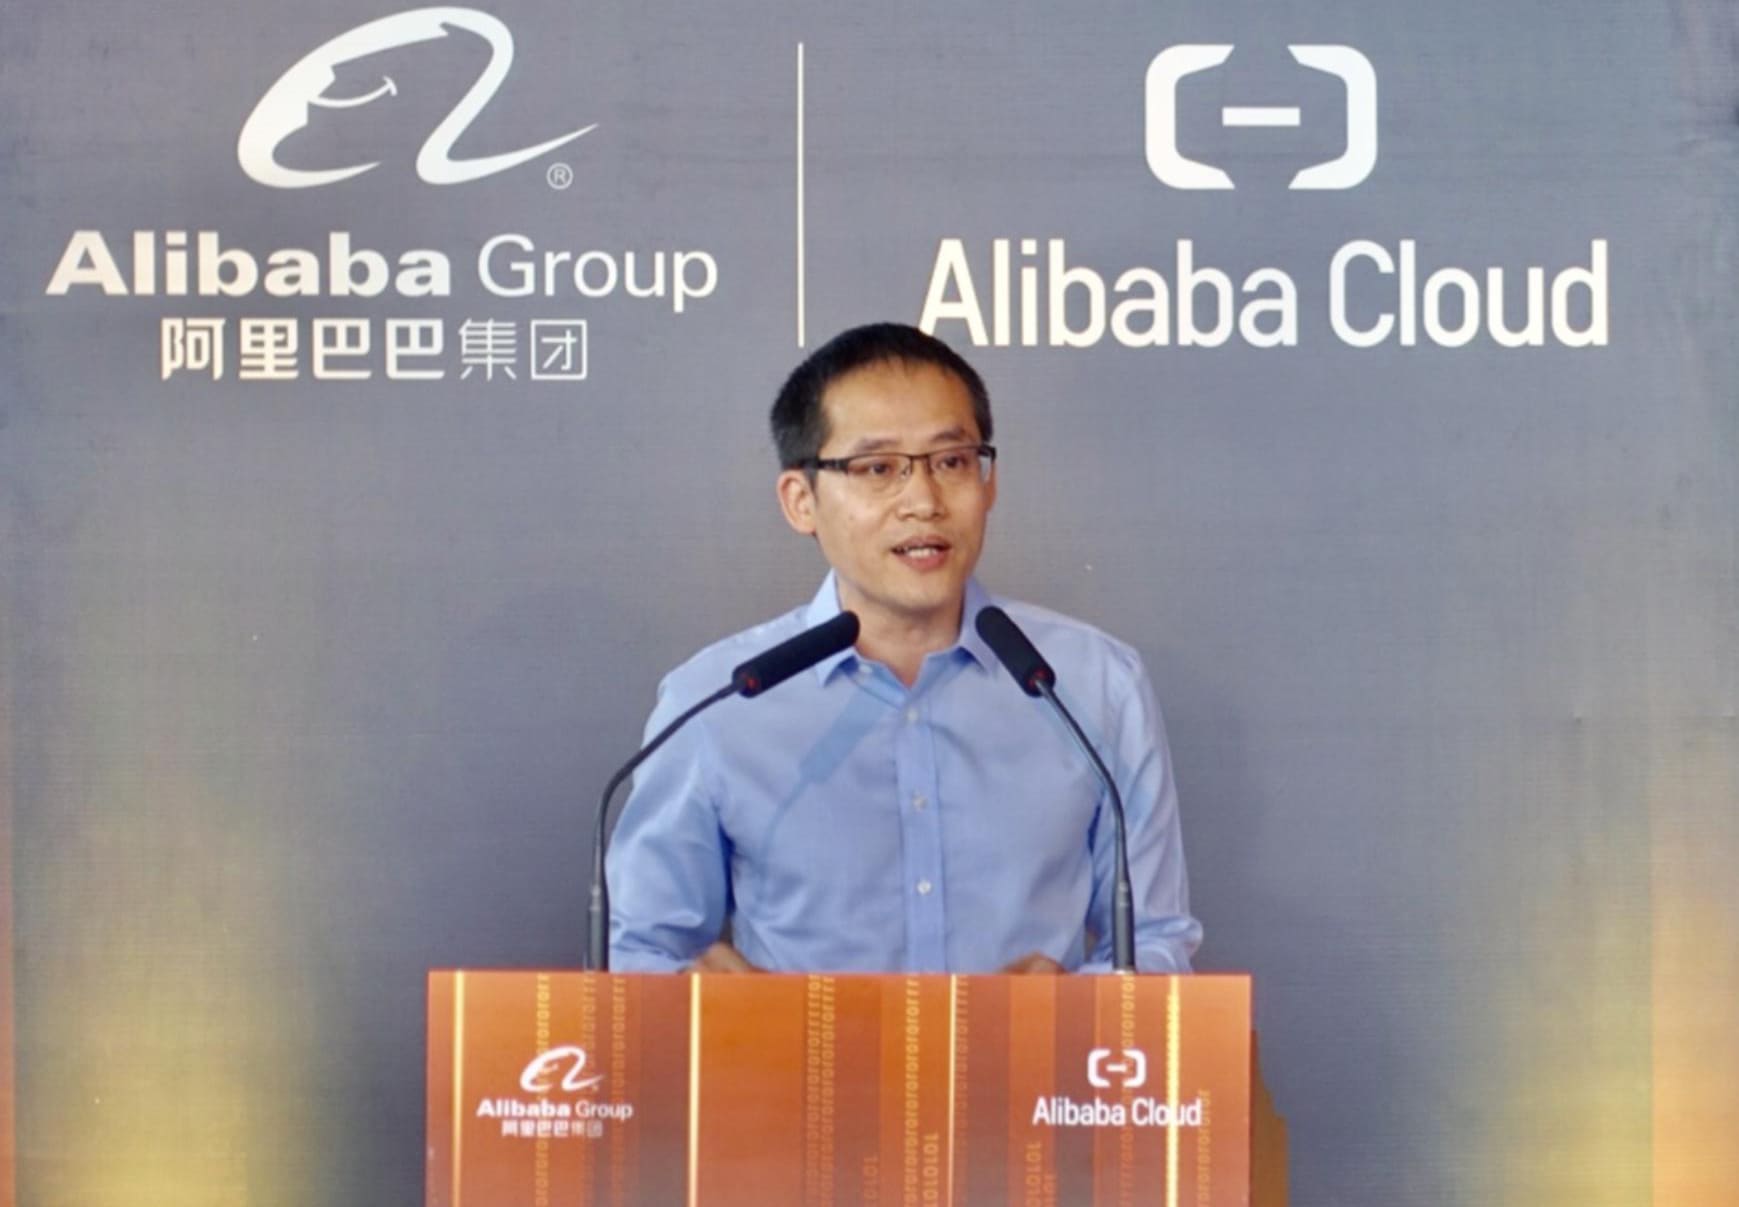 Alibaba Cloud expands products with livestream shopping, data centers